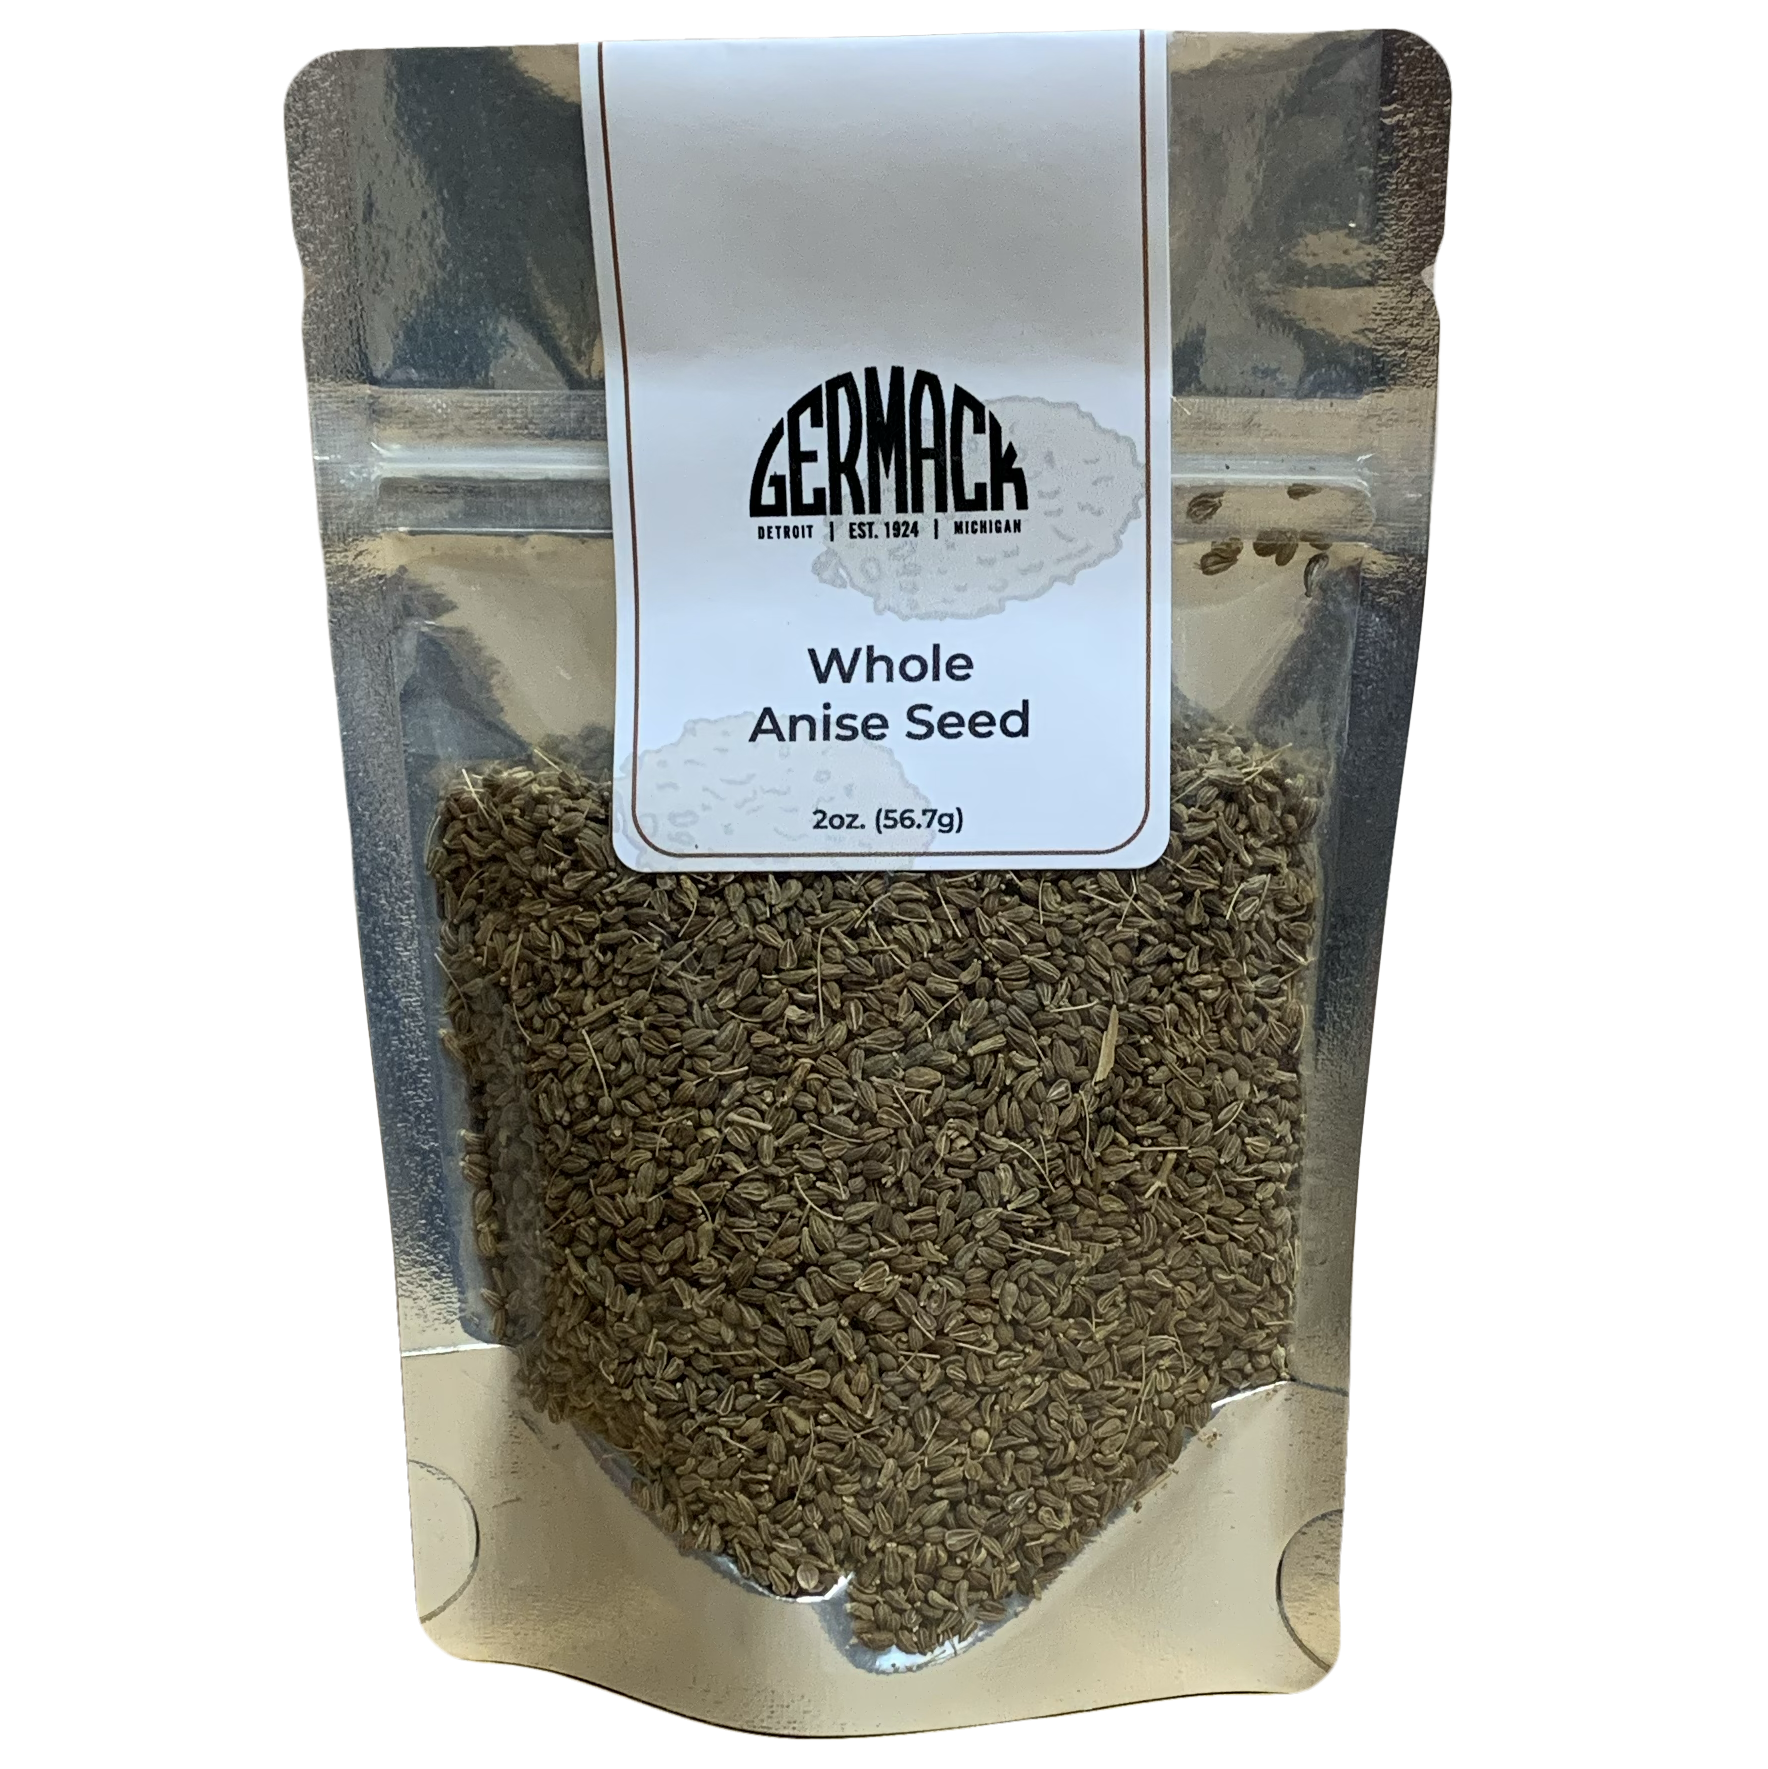 Picture Whole Anise Seed Organic 2oz